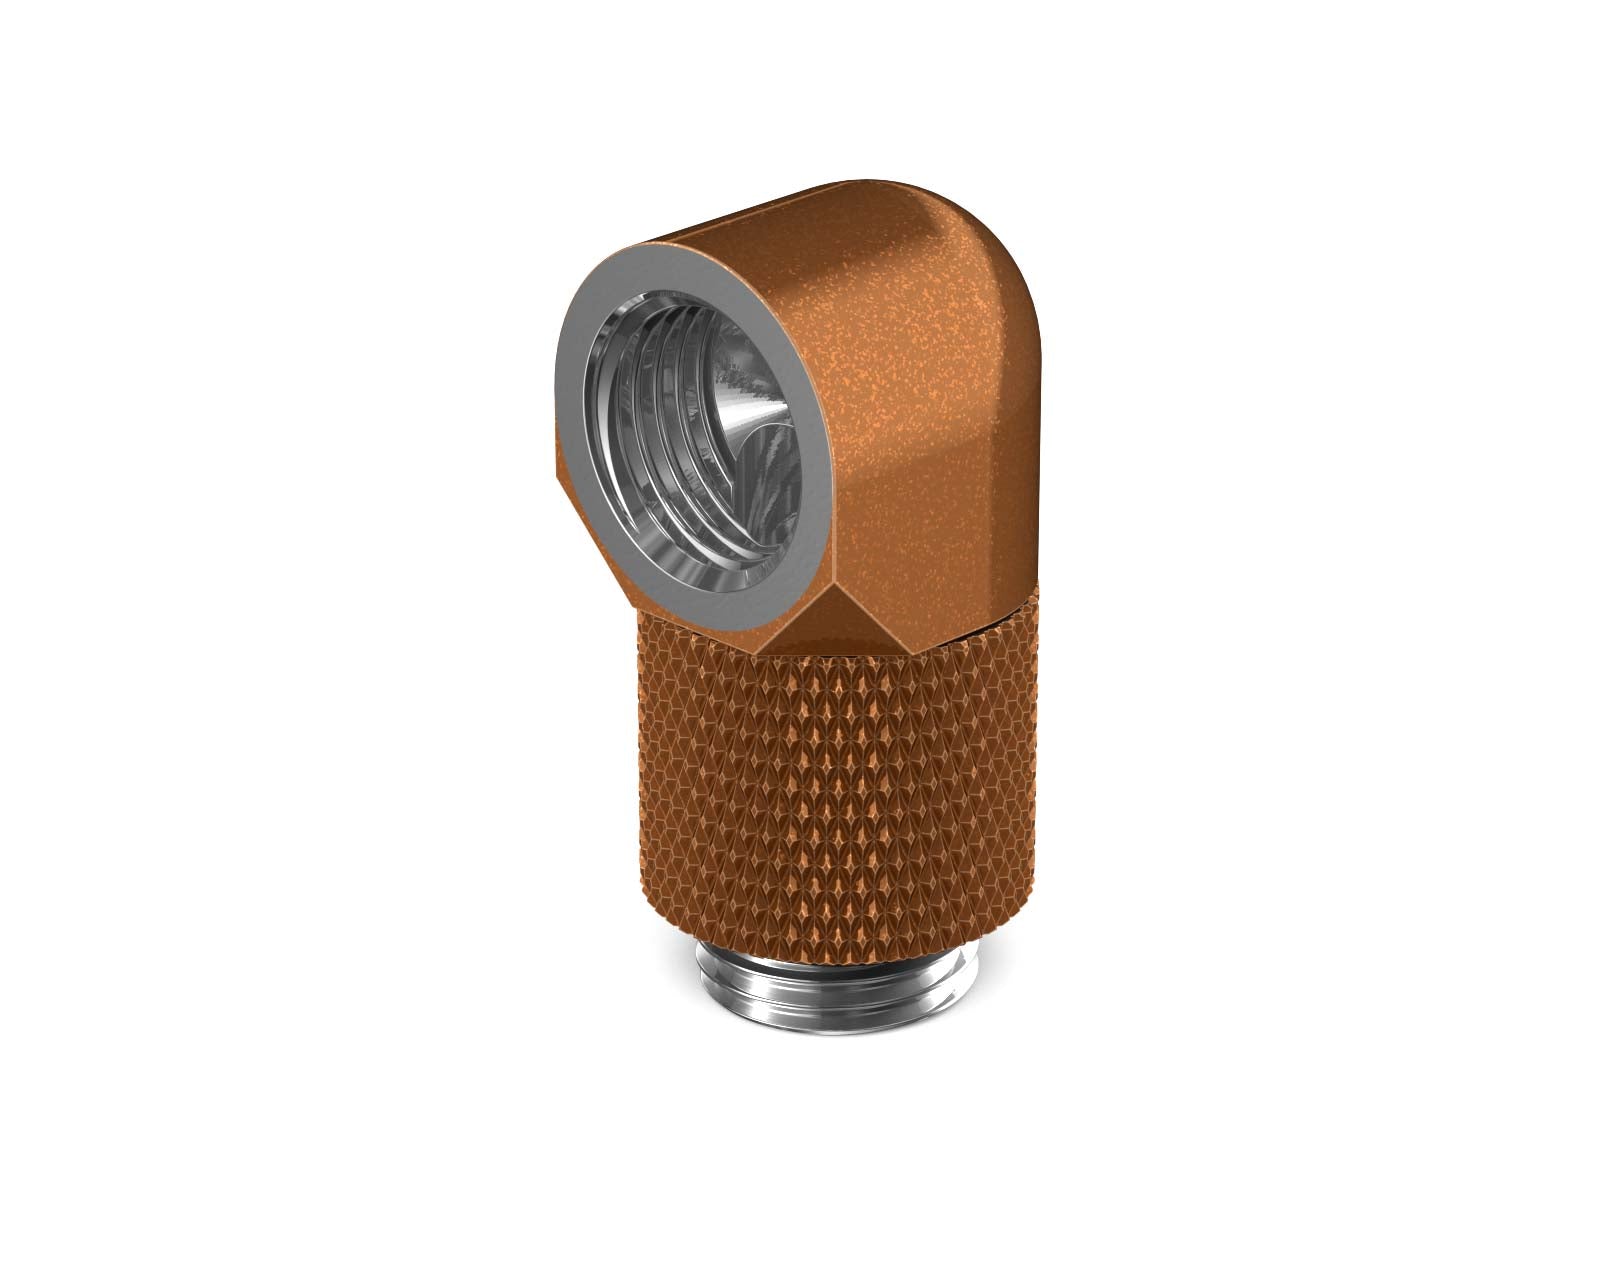 PrimoChill Male to Female G 1/4in. 90 Degree SX Rotary 15mm Extension Elbow Fitting - PrimoChill - KEEPING IT COOL Copper